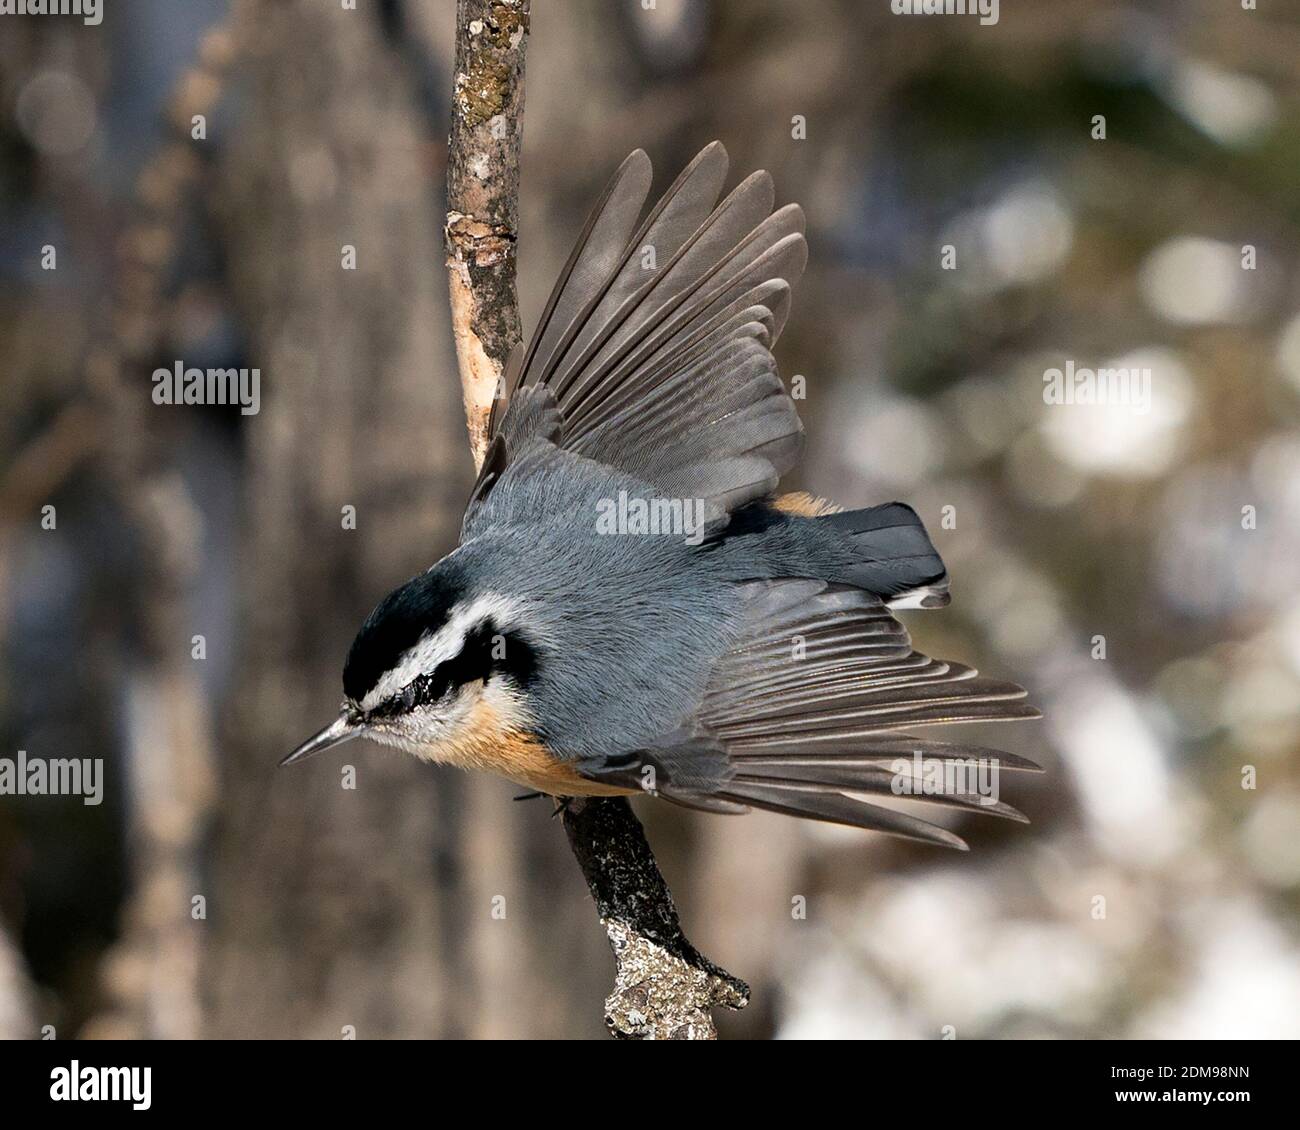 Nuthatch close-up profile view perched on a tree branch with spread wings, spread tail  in its environment and habitat with a blur background, display Stock Photo